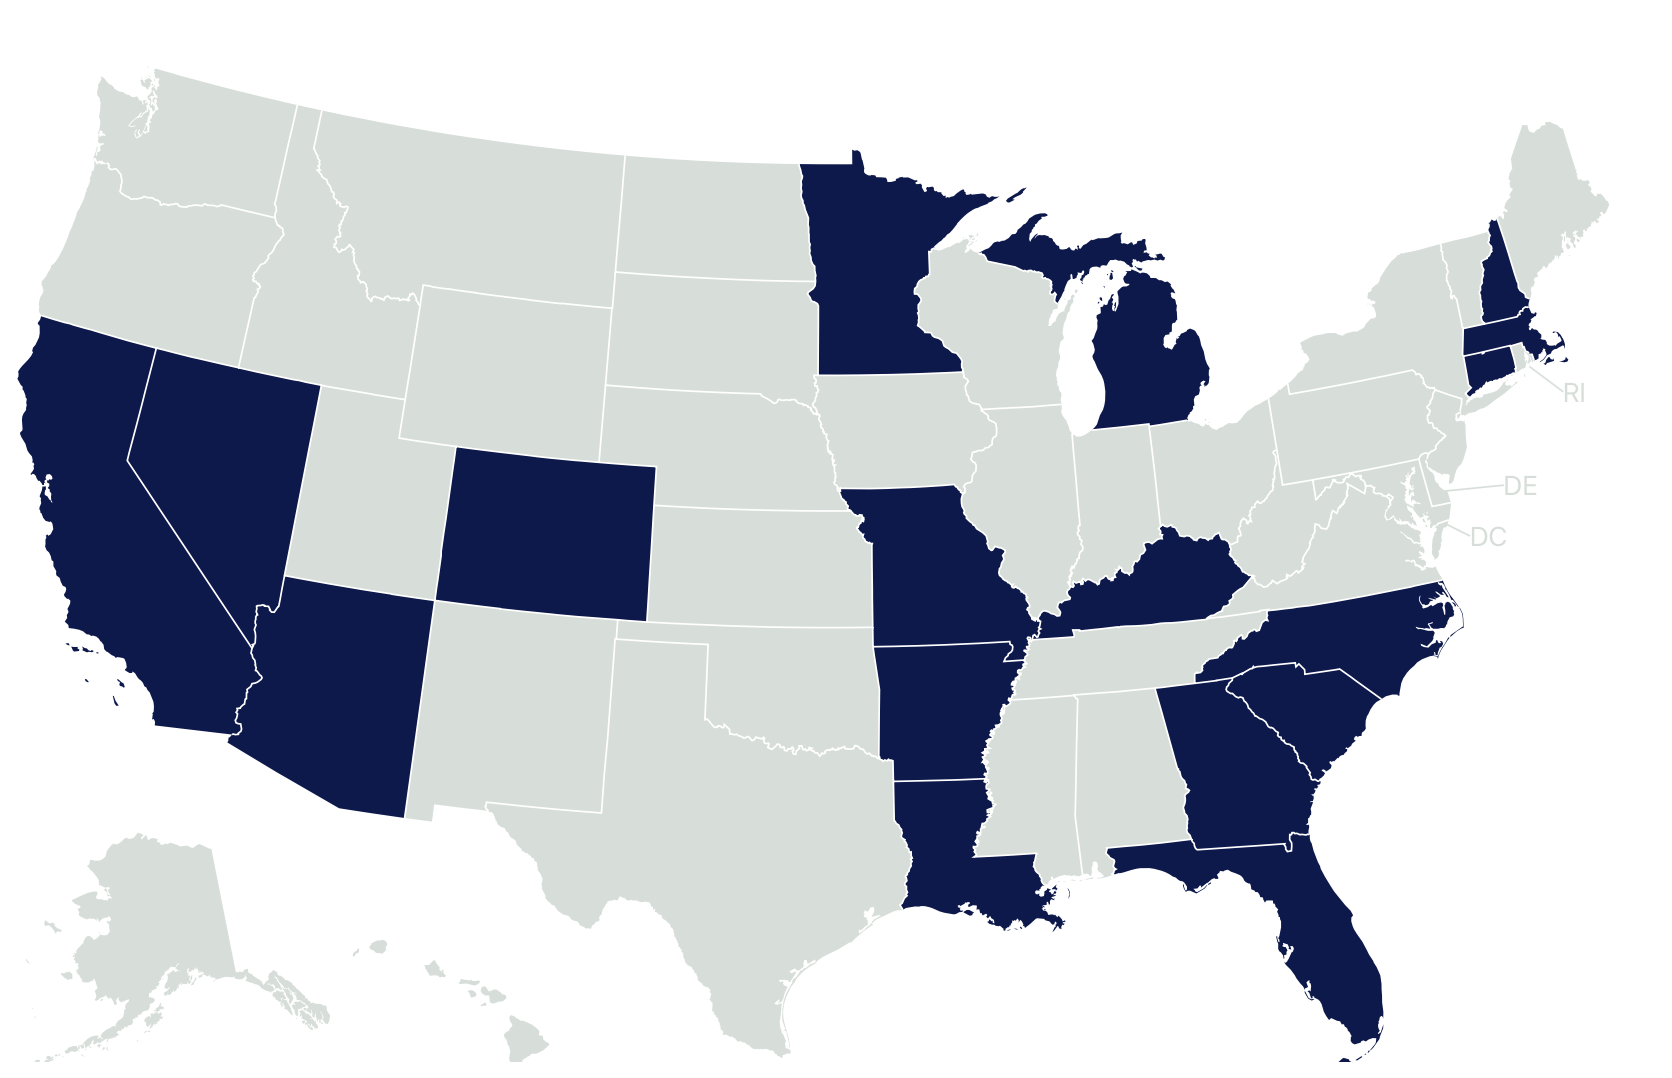 Image of map showing states that are expanding Medicaid coverage in schools, linking to a fuller discussion on the Healthy School Campaign site. The 16 states that had expanded coverage as of May 2022 were: Arkansas, Arizona, California, Colorado, Connecticut, Florida, Kentucky, Louisiana, Massachusetts, Michigan, Minnesota, Missouri, North Carolina, New Hampshire, Nevada, and South Carolina